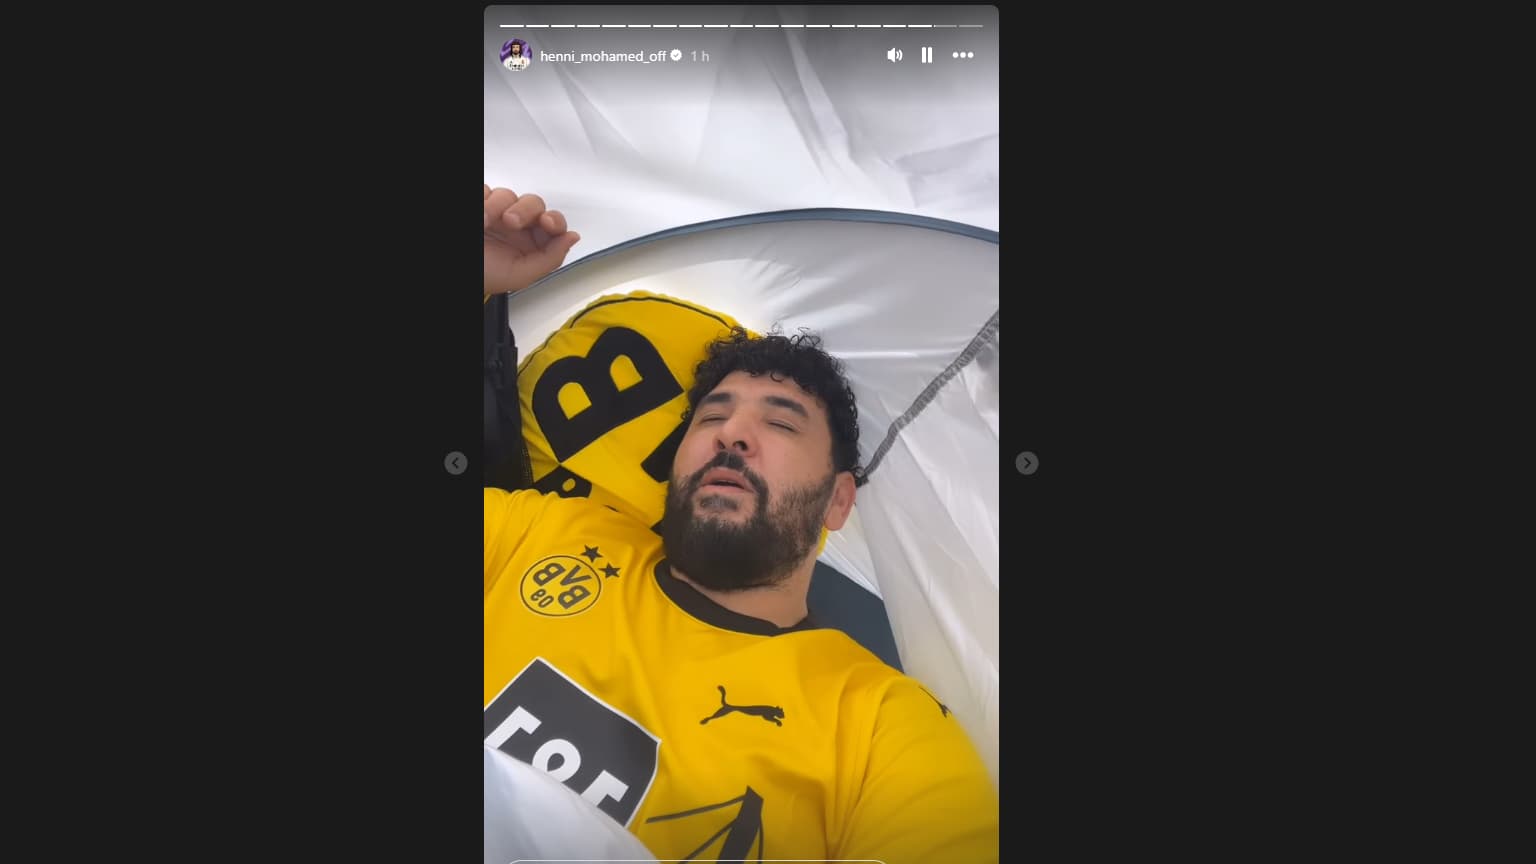 The “nightmare” of the influencer Mohamed Henni, who camped in front of the stadium to support Dortmund against PSG